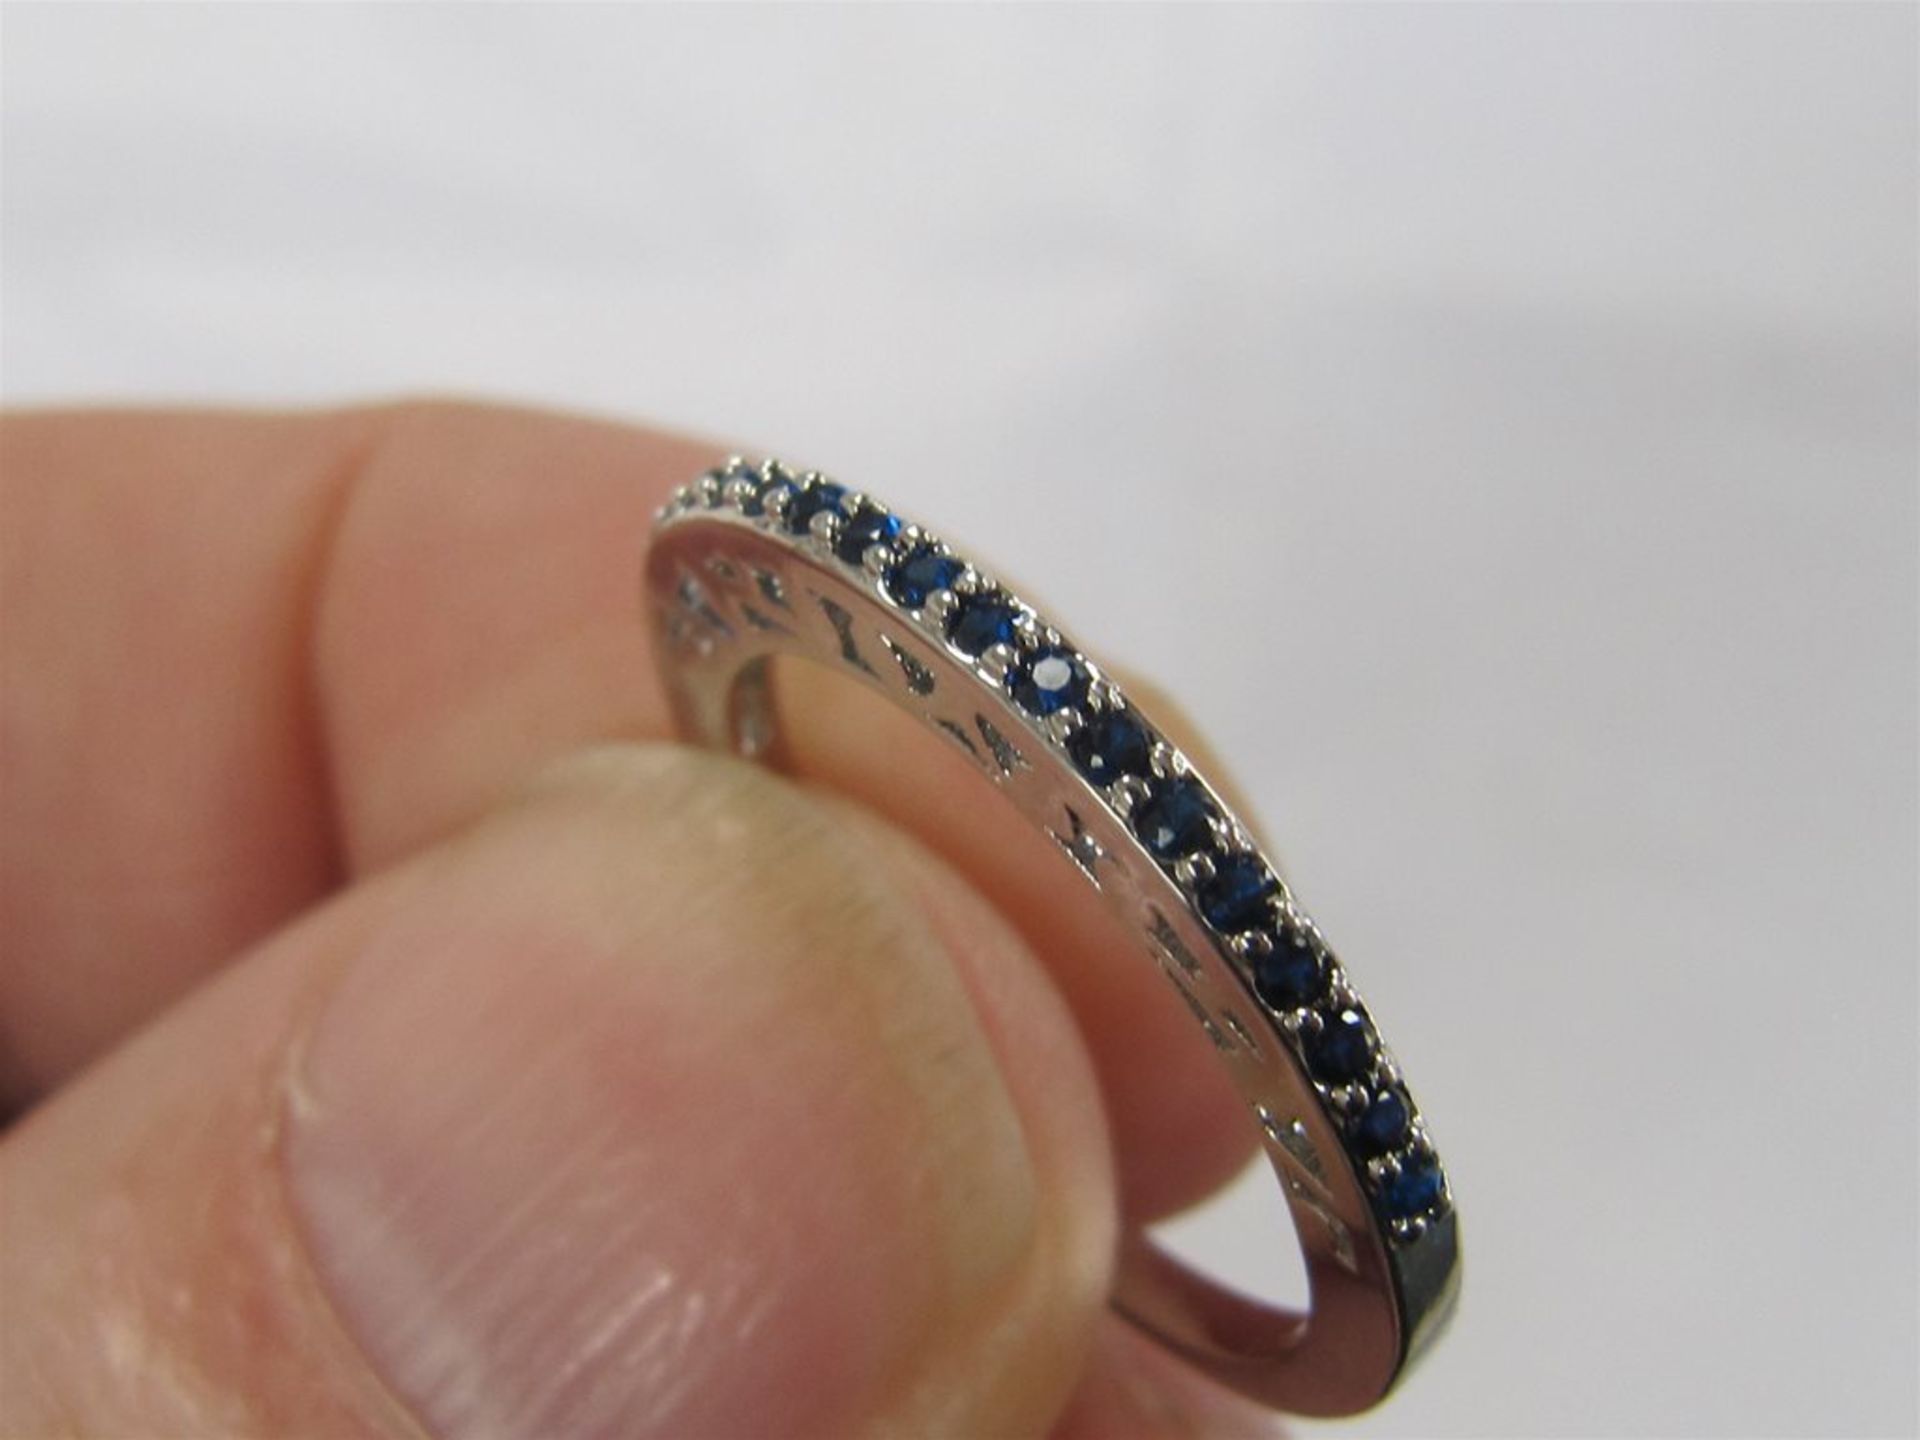 Eternity Ring. Free Shipping when you Win 2 Lots or more. - Image 3 of 5